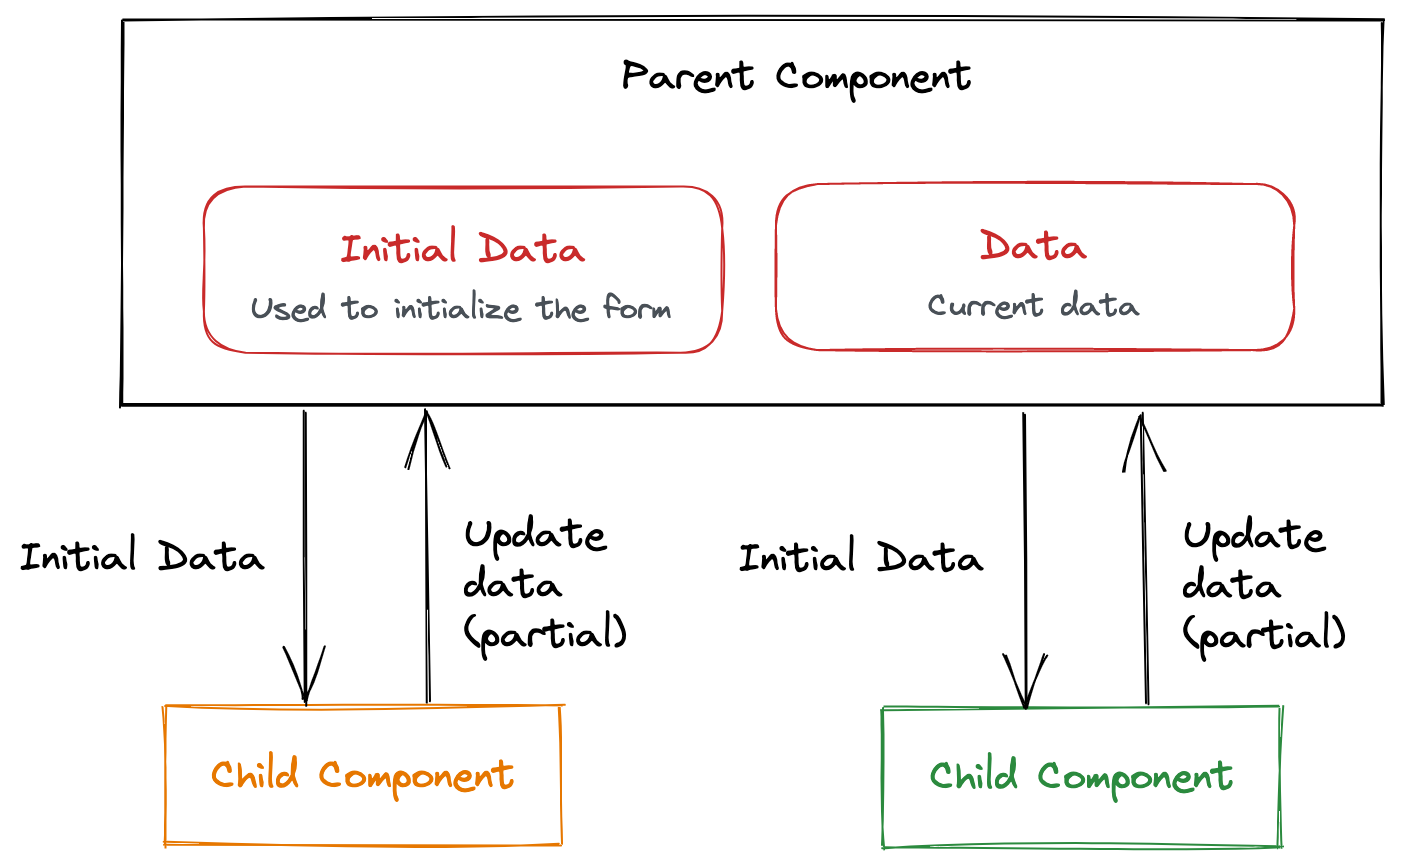 The parent component provides initial data to the child components and the child components provide updated data to the parent component.